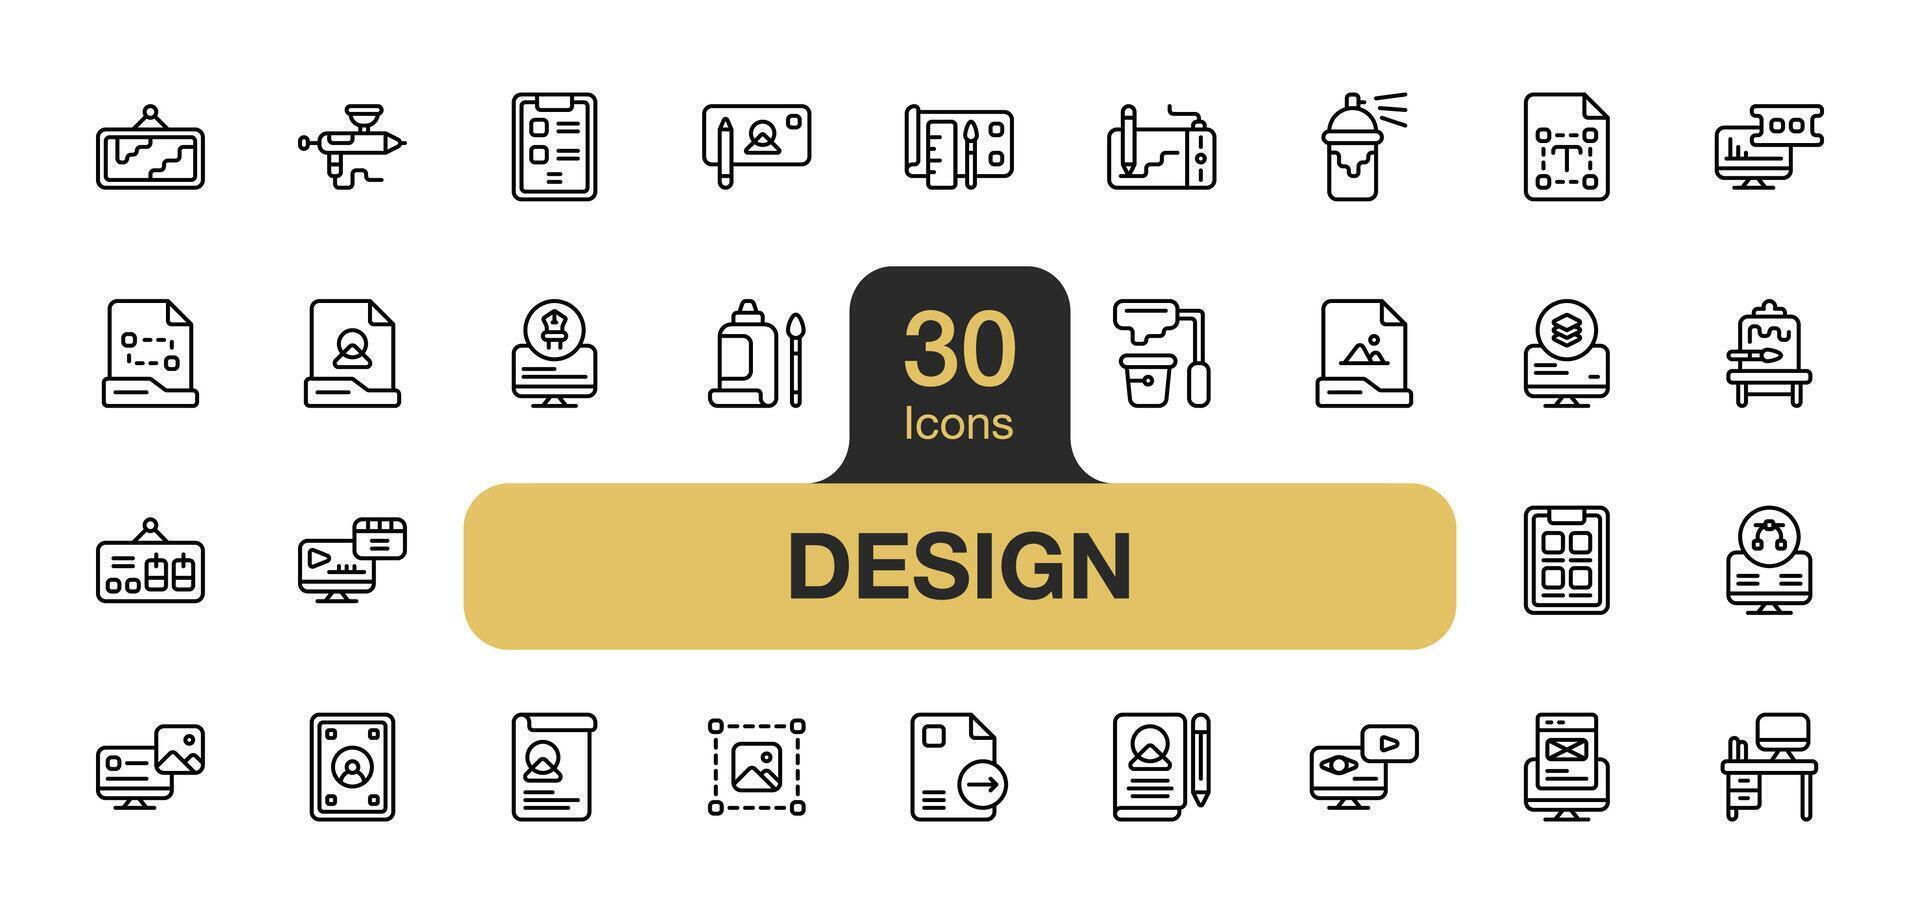 Set of 30 Graphic Design icon element sets. Includes visual communication, motion graphic, resizing, design process, and More. Outline icons vector collection.